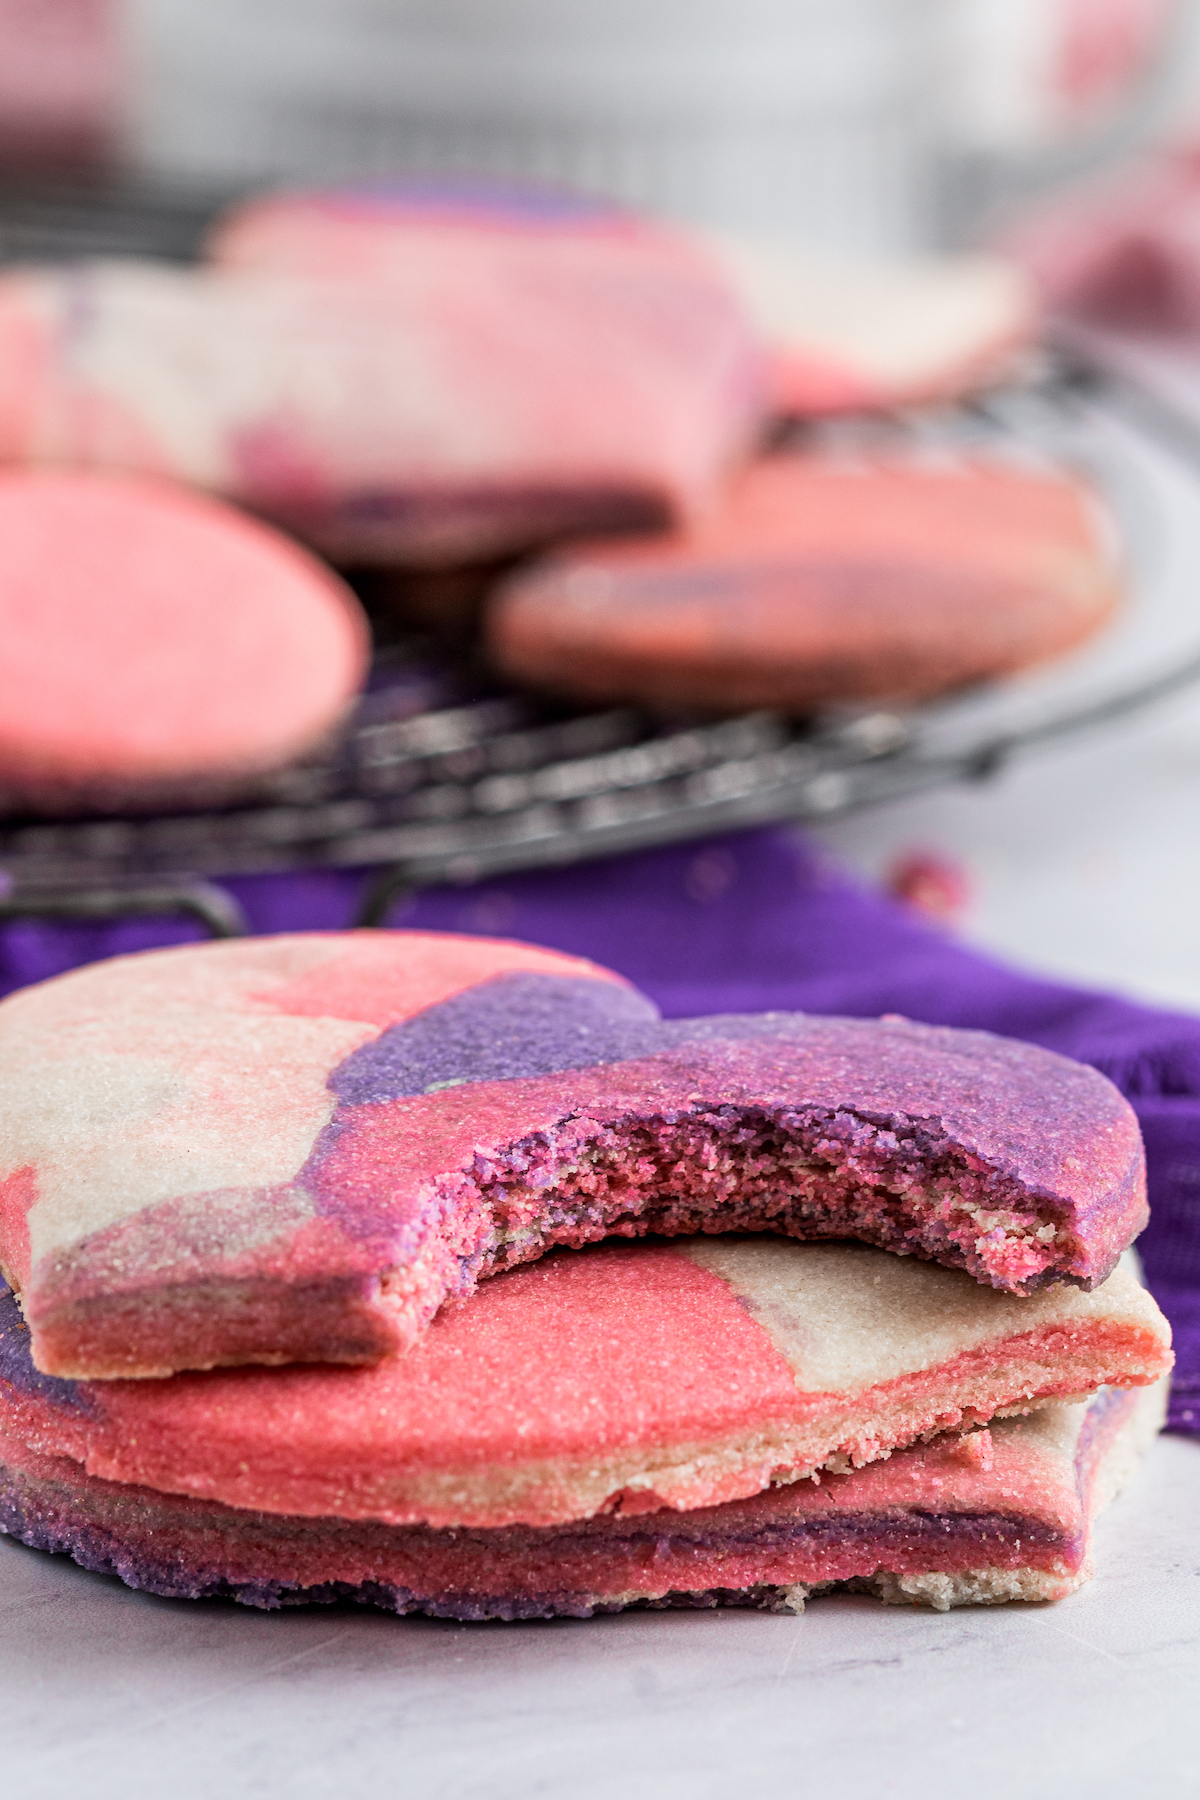 Several heart-shaped cookies in a stack. The top cookie has a bite taken out of it, to show texture.